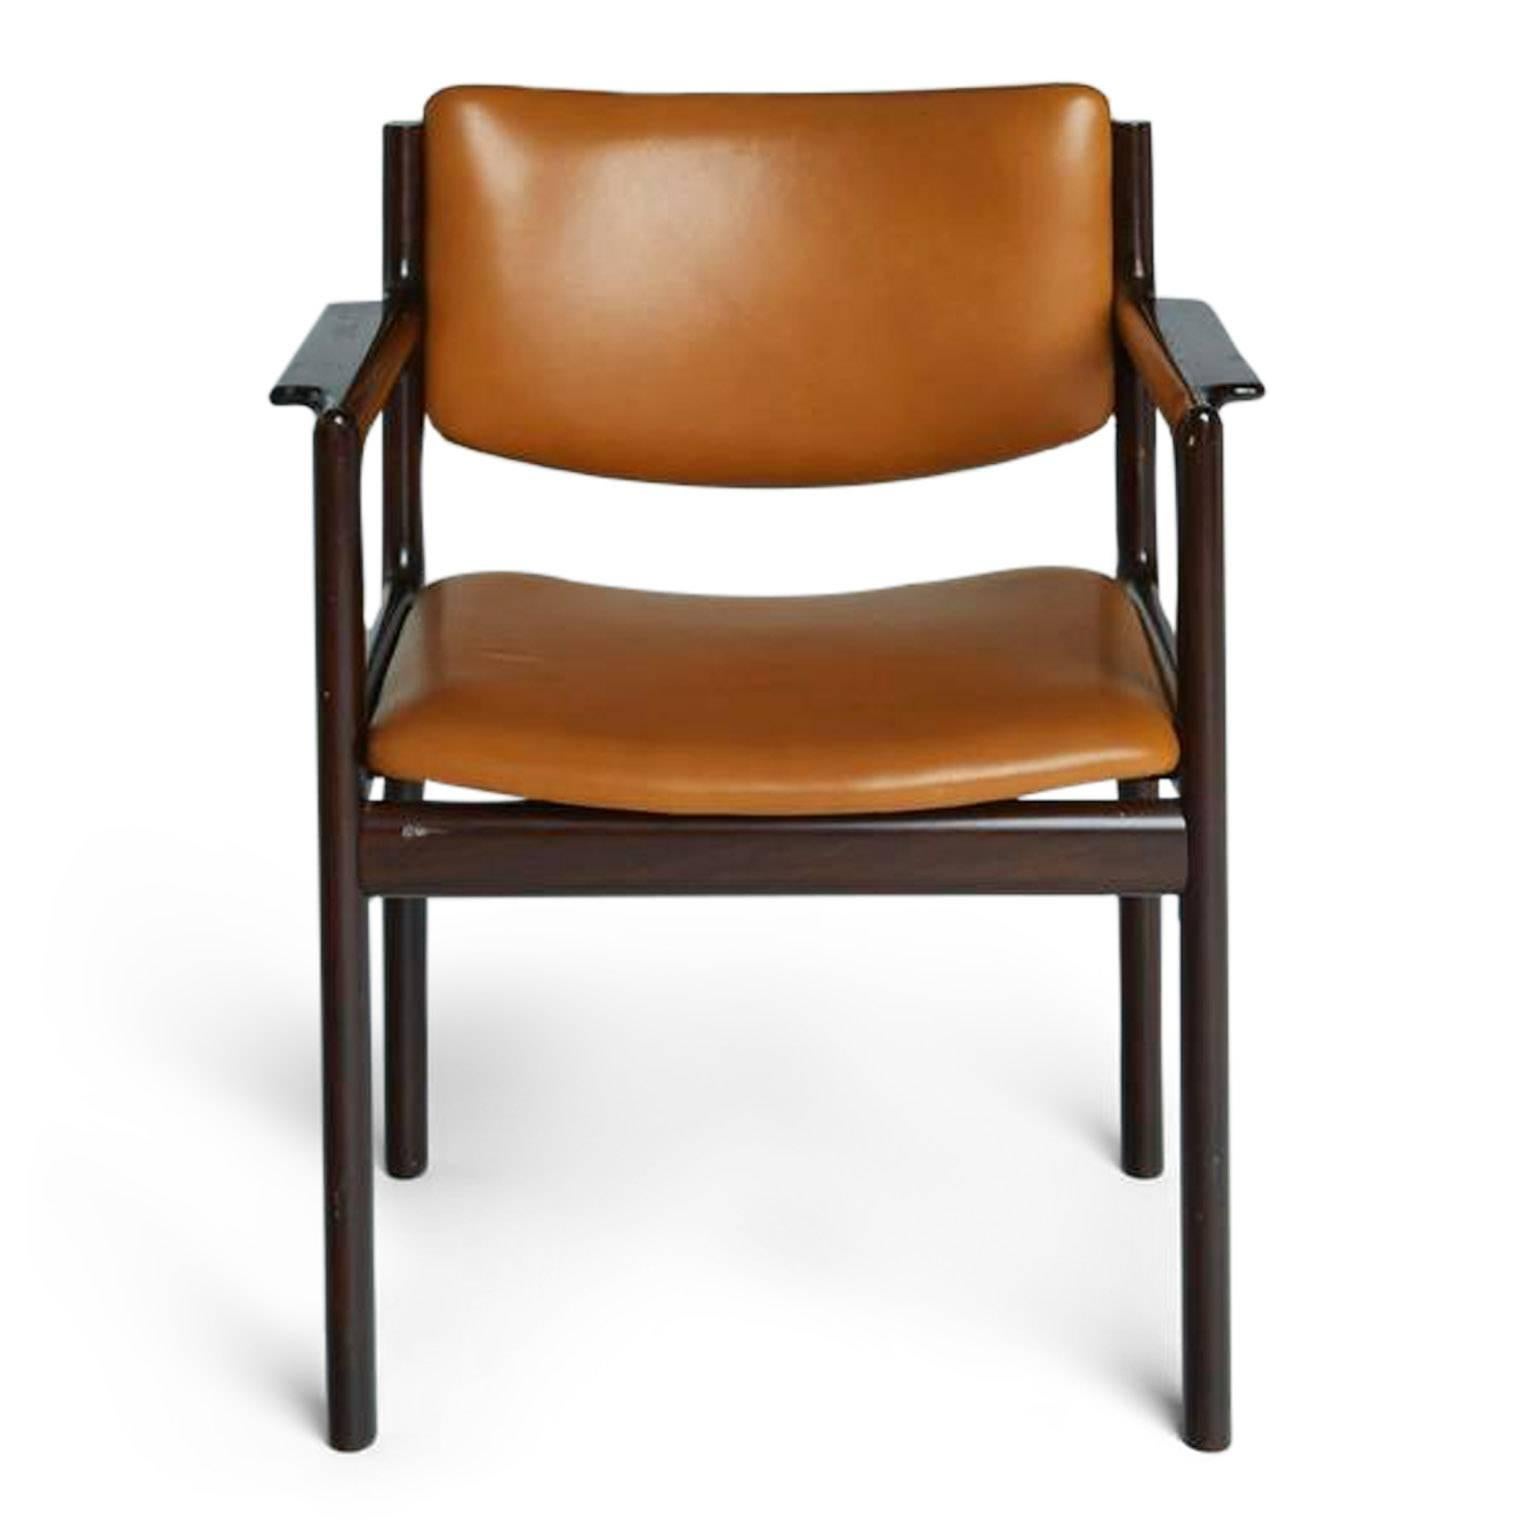 This set of caramel Mid-Century Modern armchairs are as durable in construction as they are attractive in their Danish modern design. The caramel leatherette upholstery of the seats and backs of each chair is framed by rich, dark rosewood with